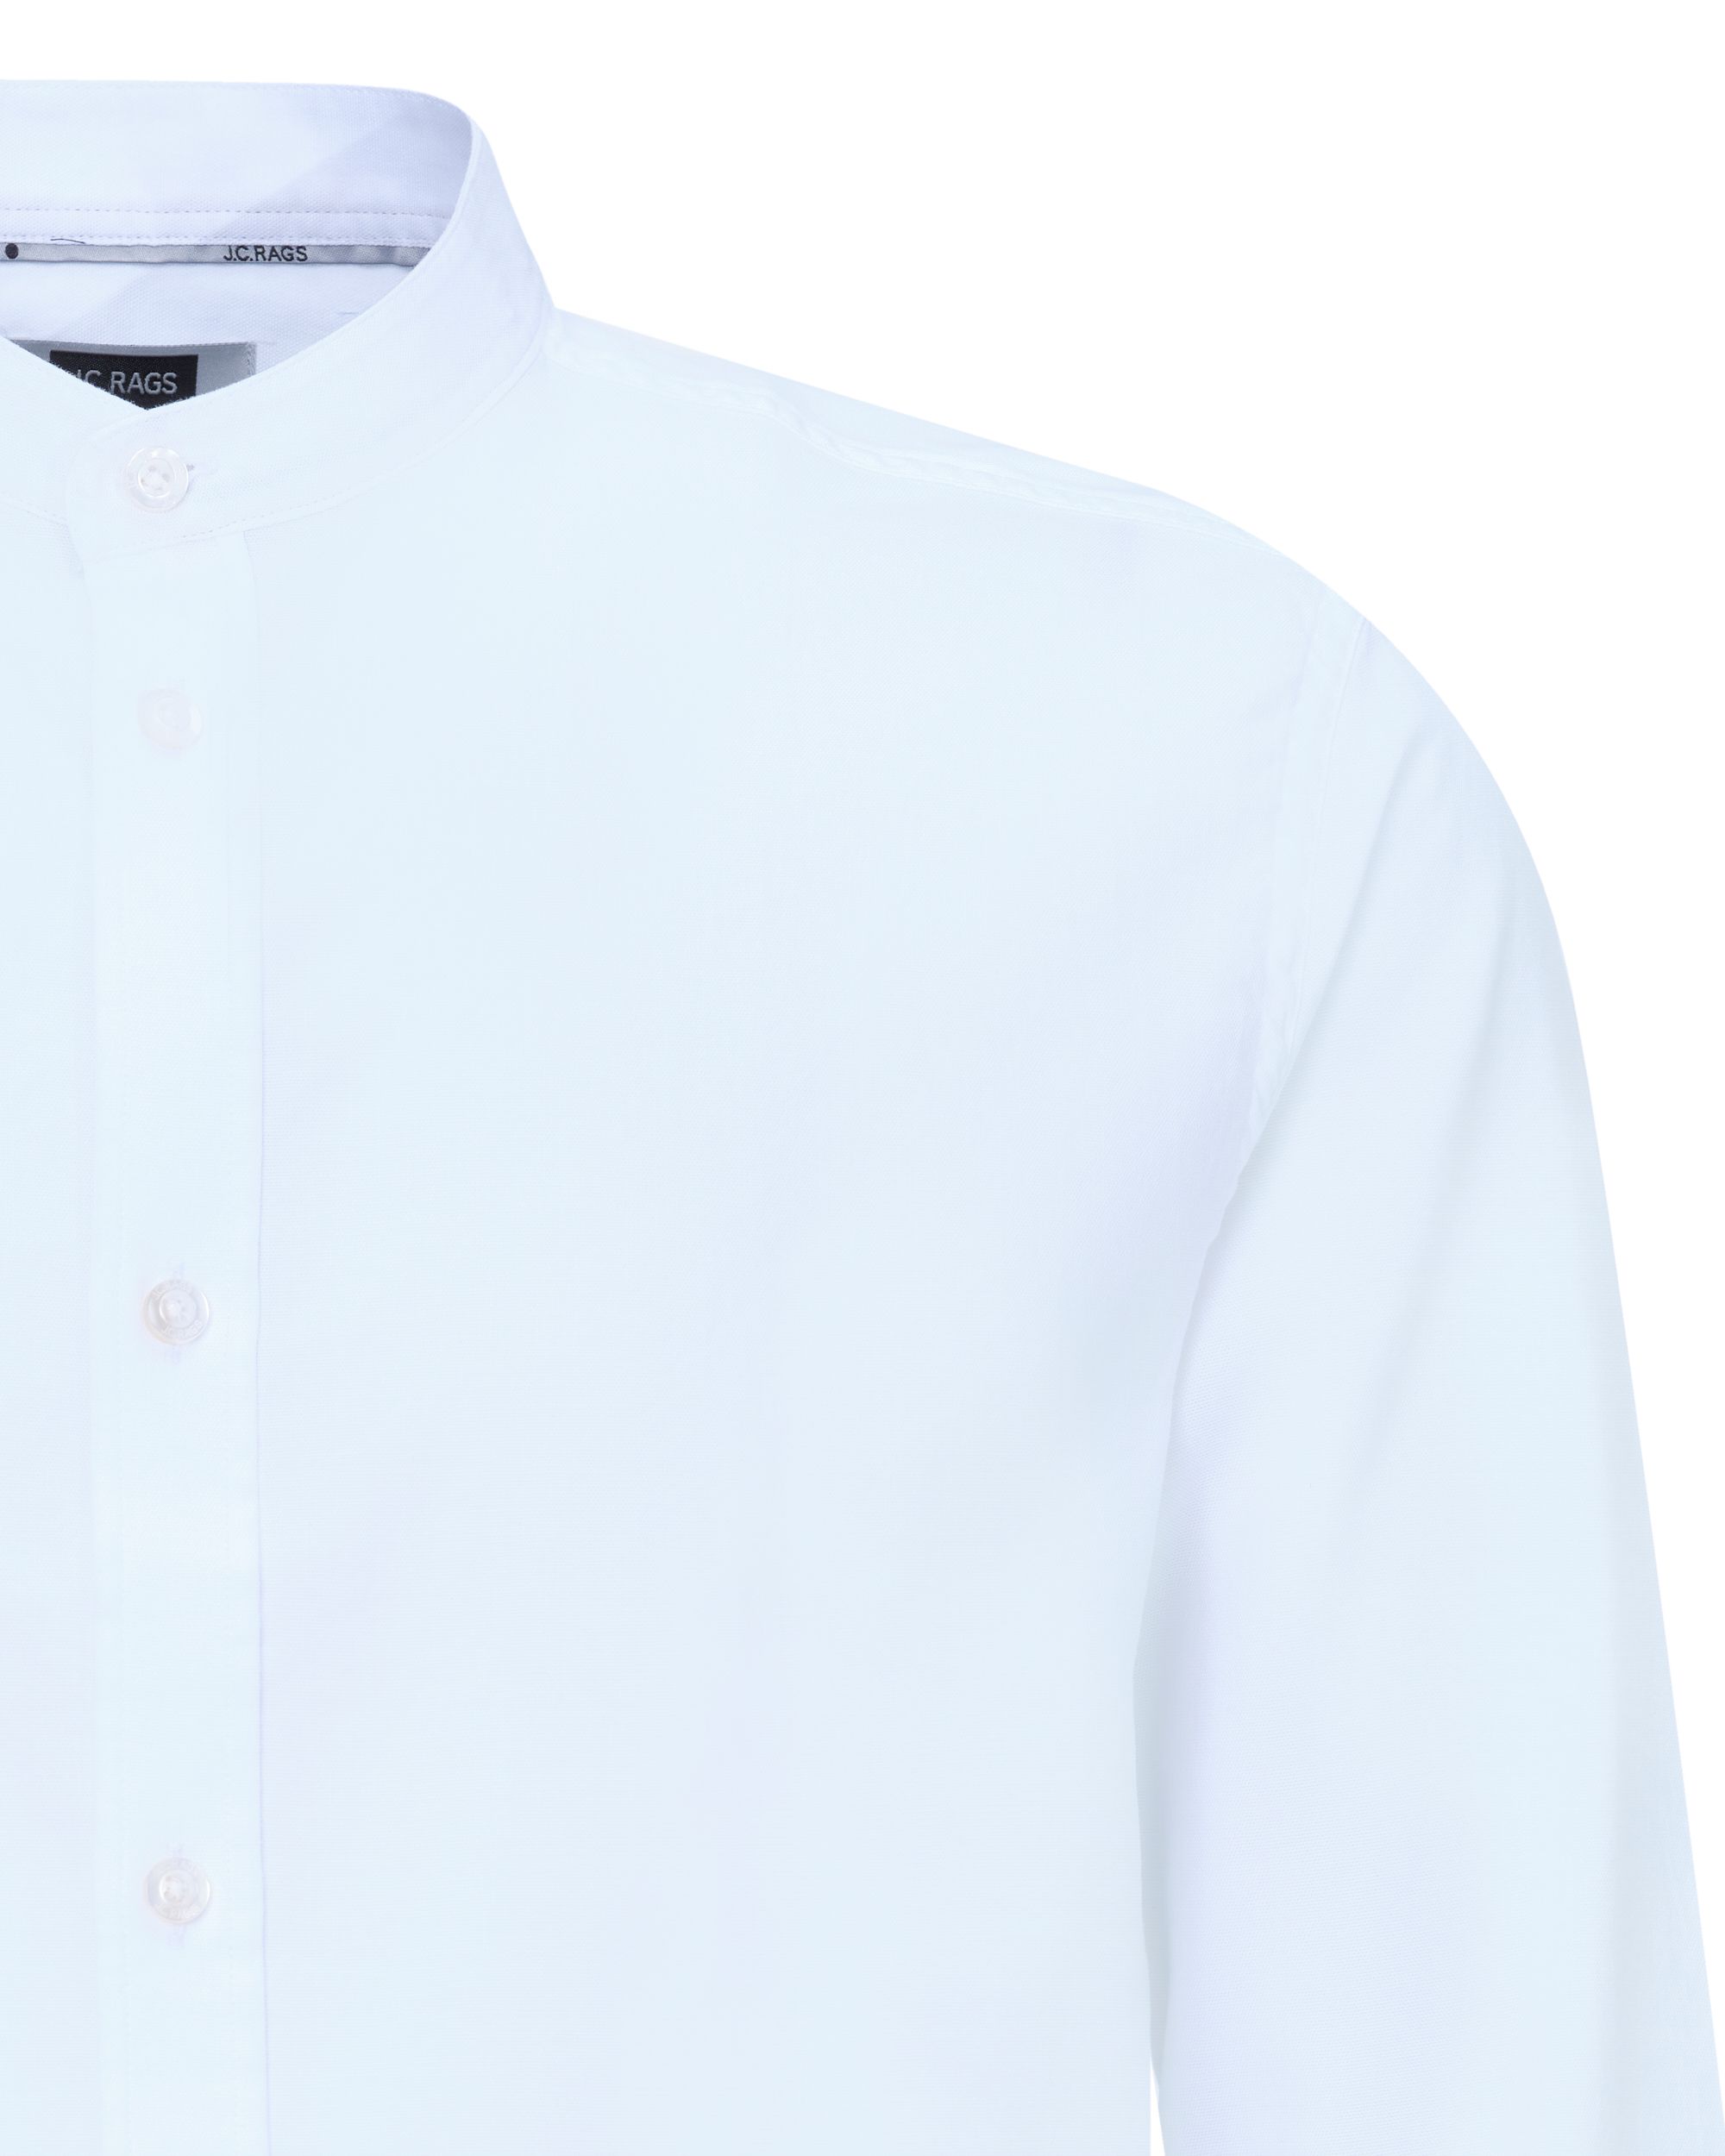 J.C. RAGS Casual Overhemd LM WHITE 081594-001-L